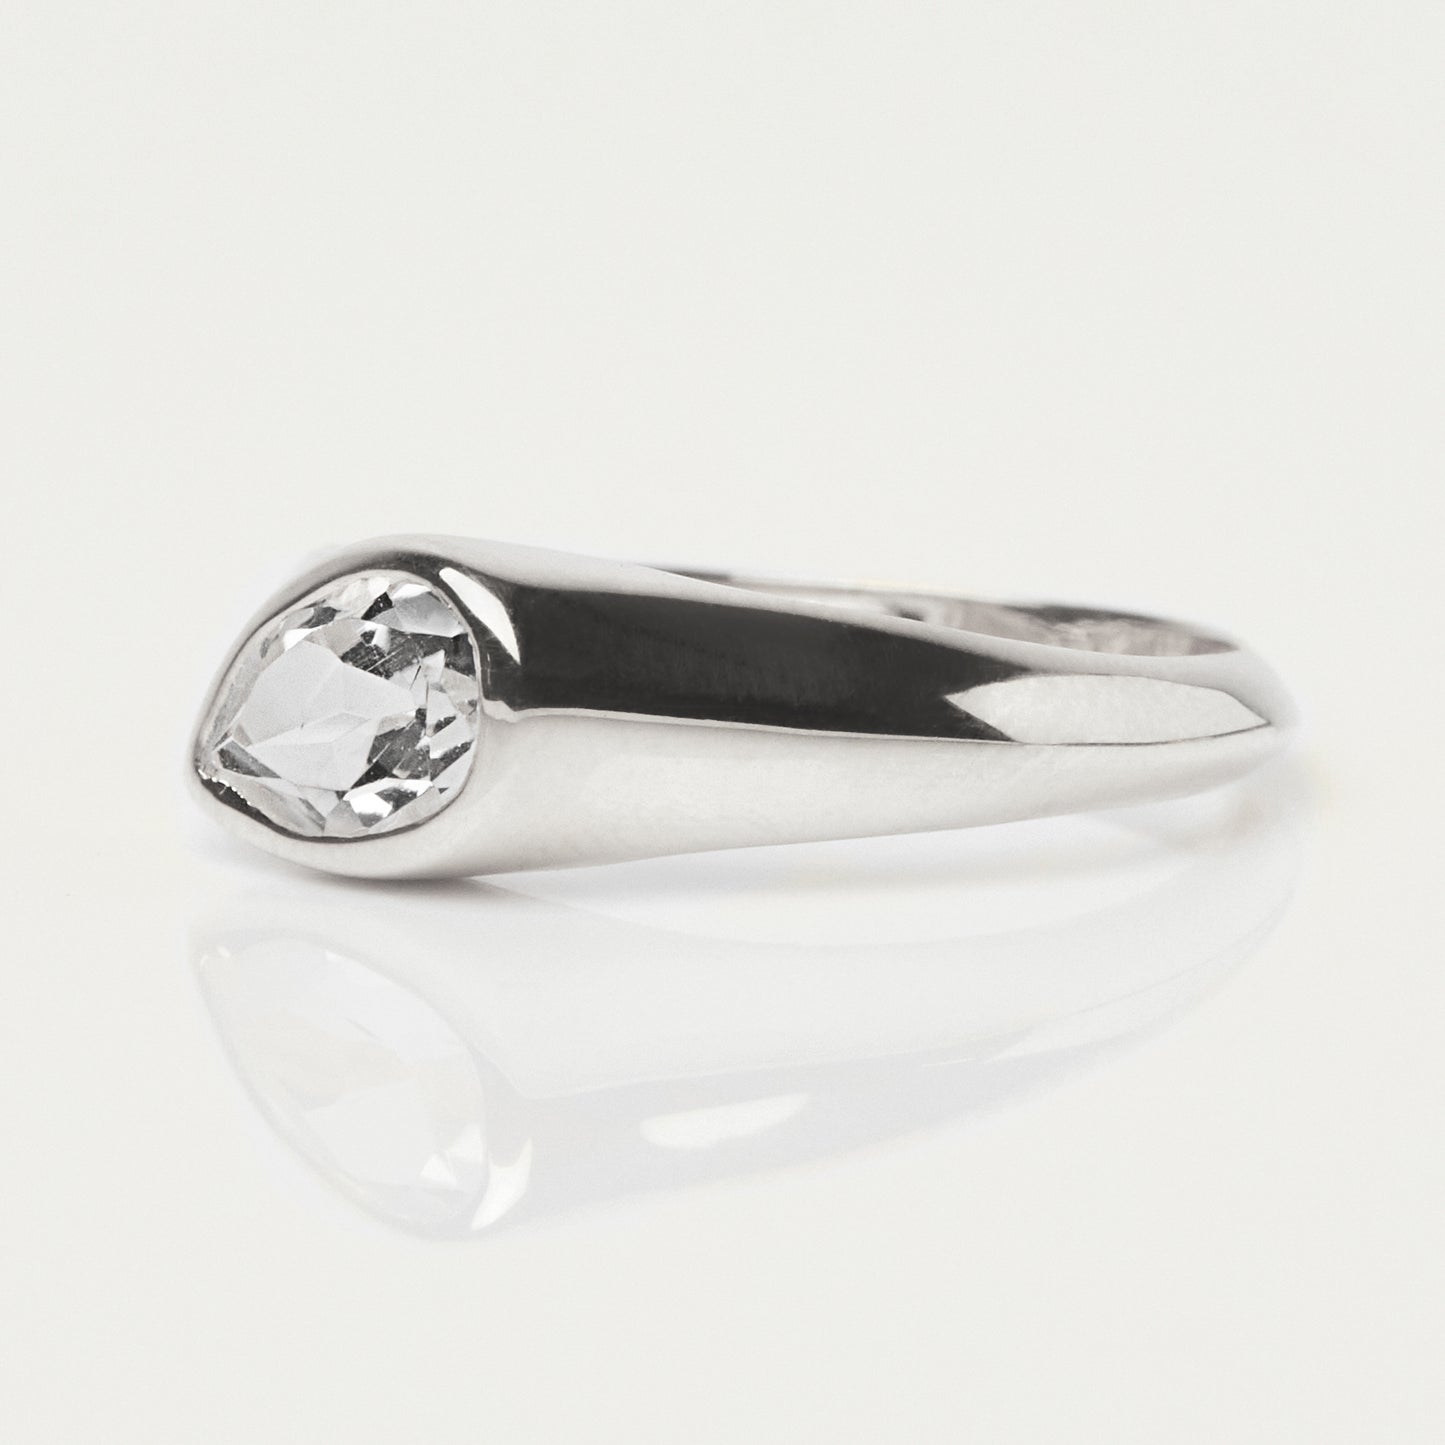 Zoe Sugg Heal Intention Ring in Topaz